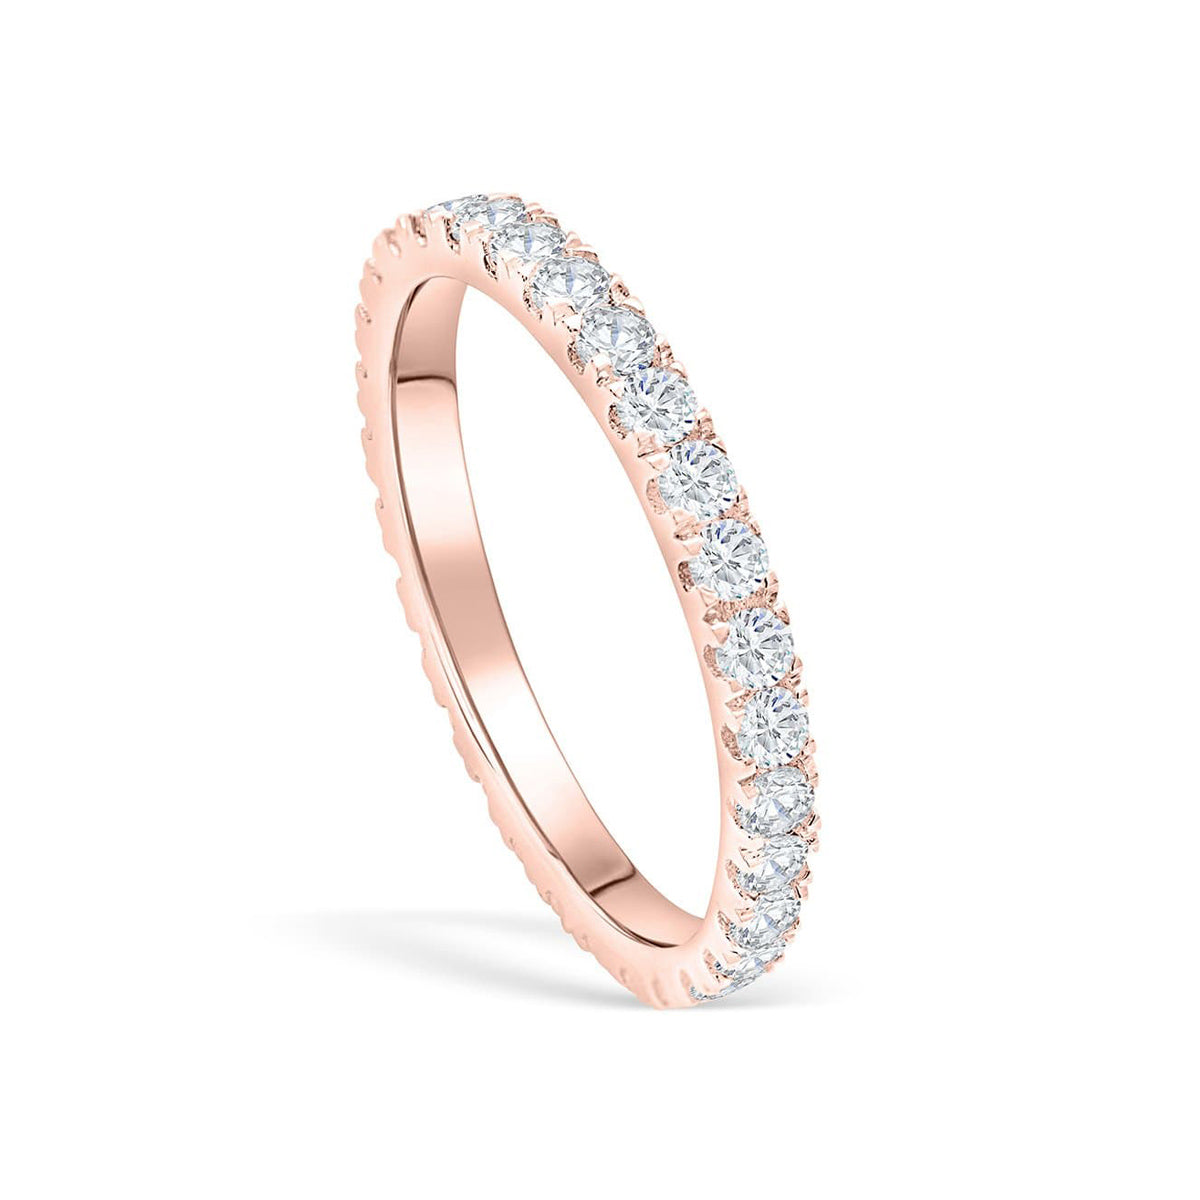 Ladies Rings: Engagement Rings for Women – Page 2 – Modern Gents